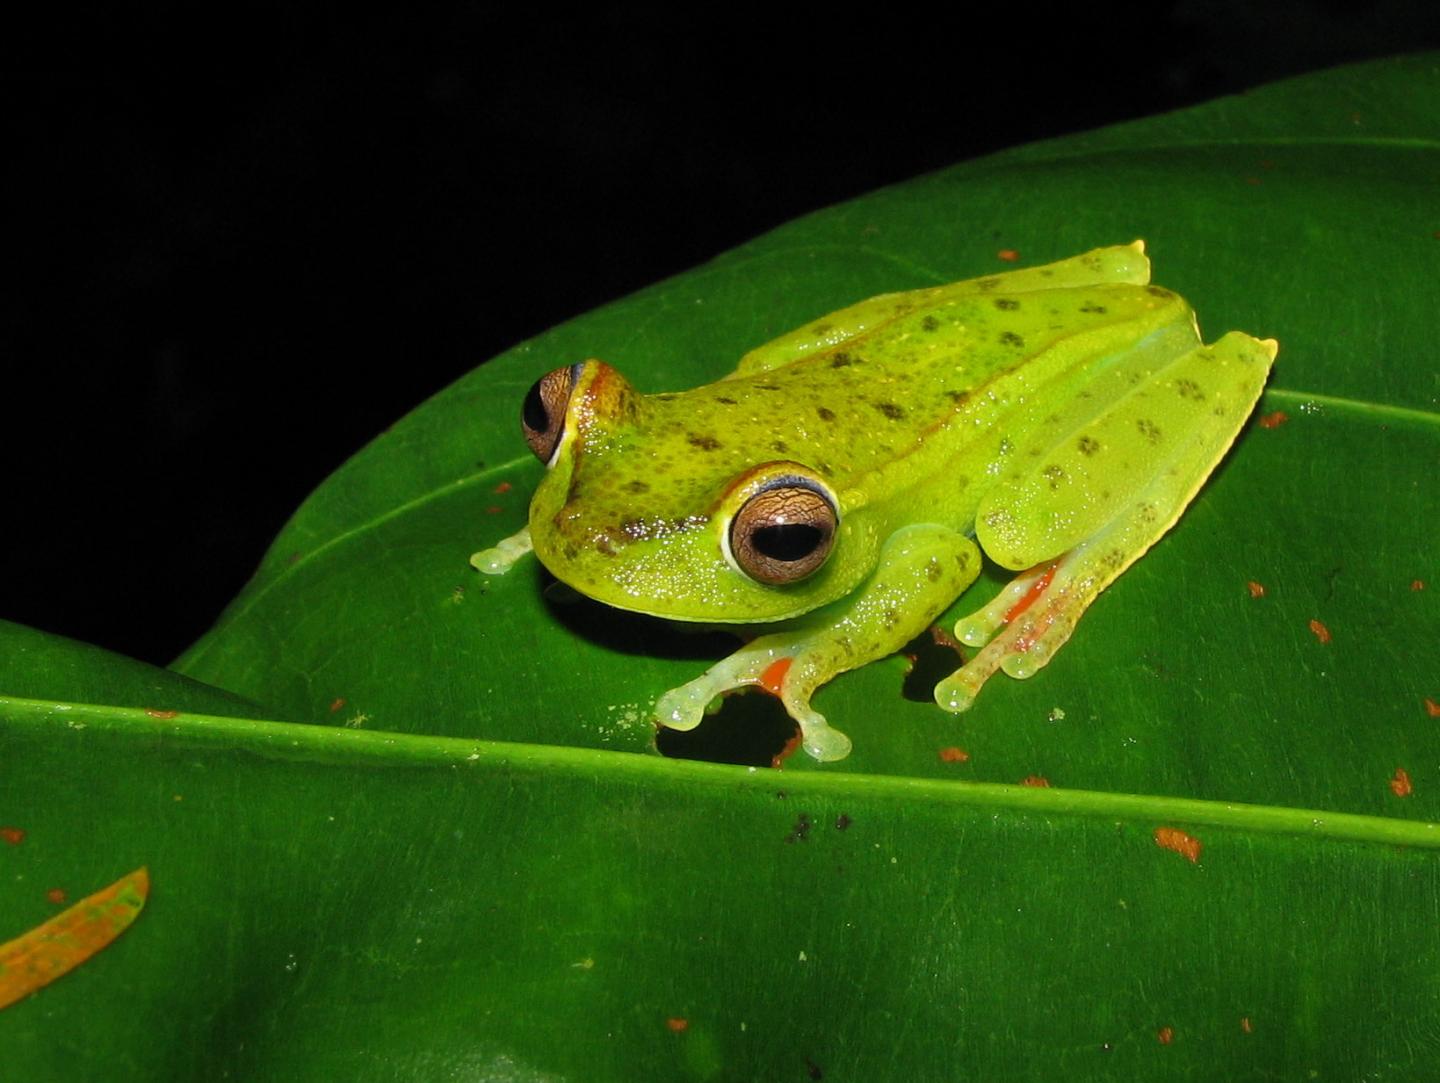 This Frog Species, Hypsiboas rufitelus, and Closely Related Species Tend to Persist in Converted